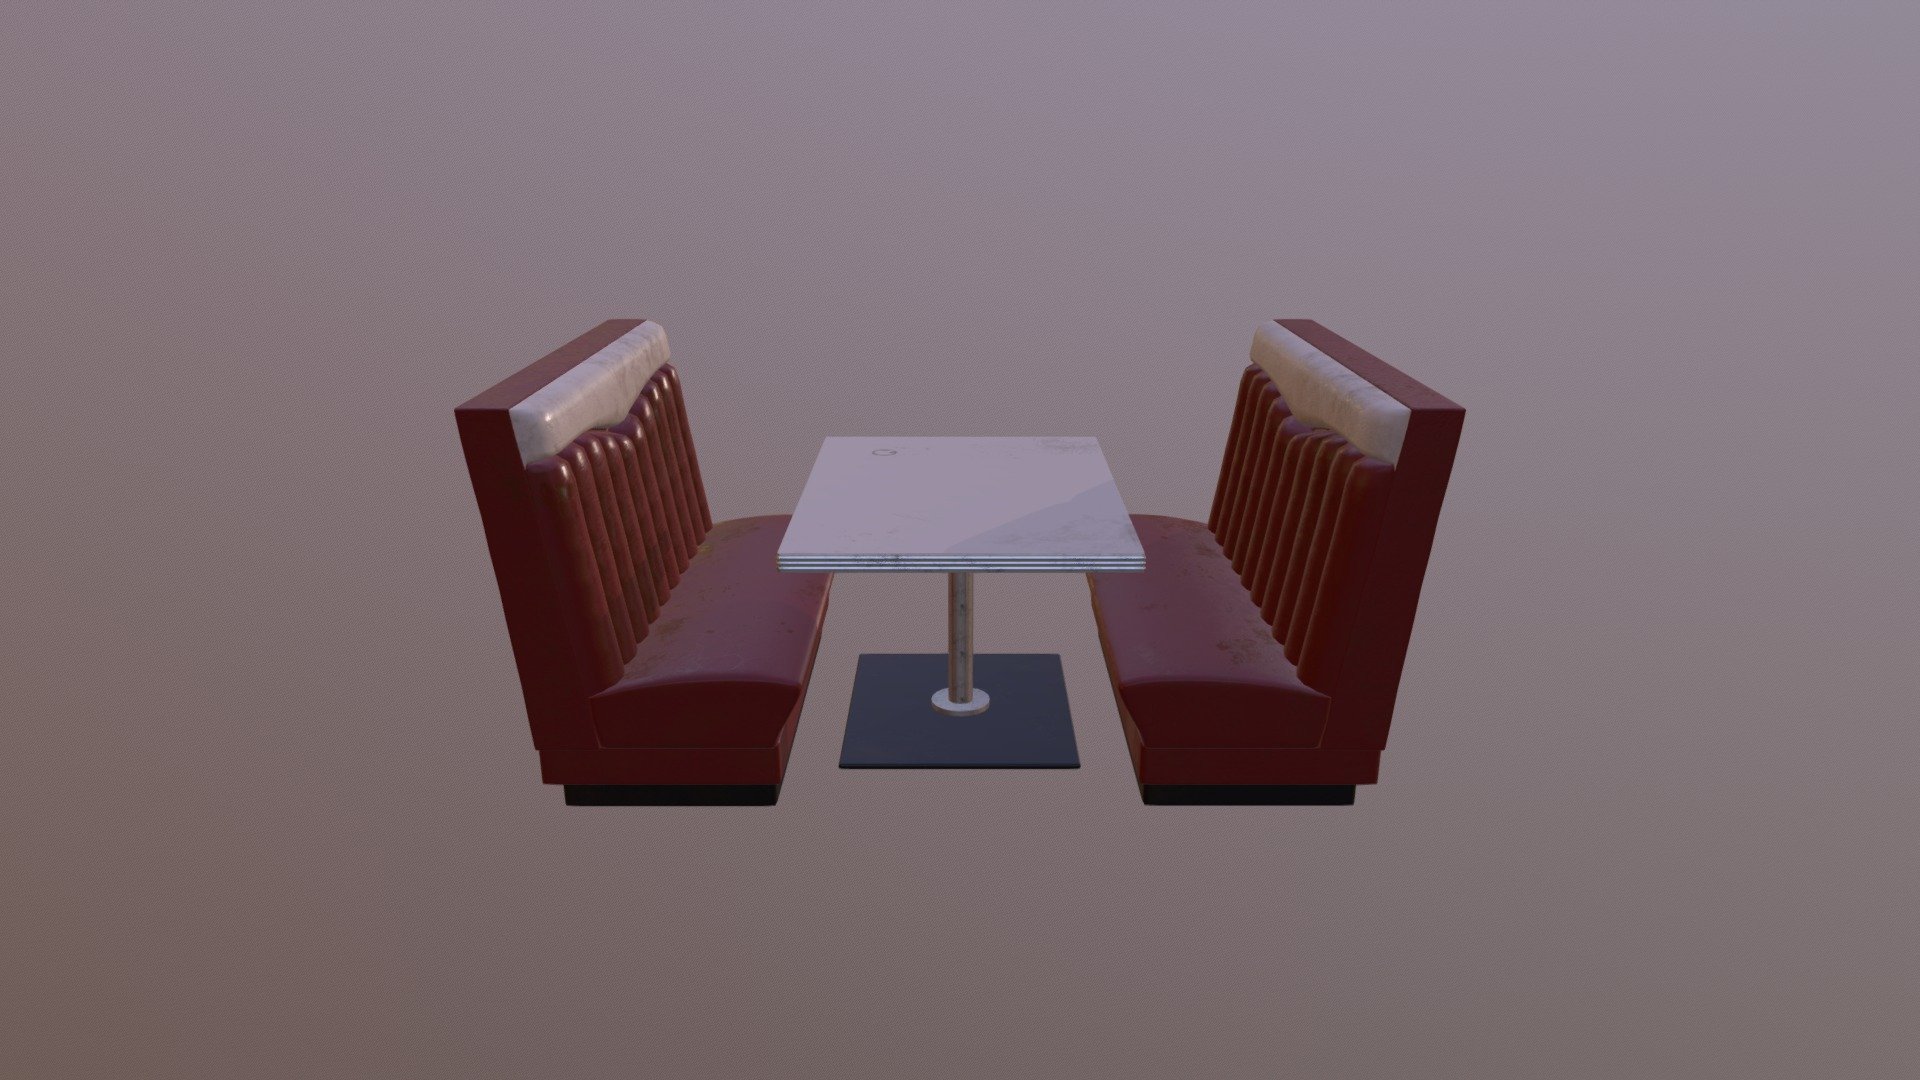 Diner Booth & Table